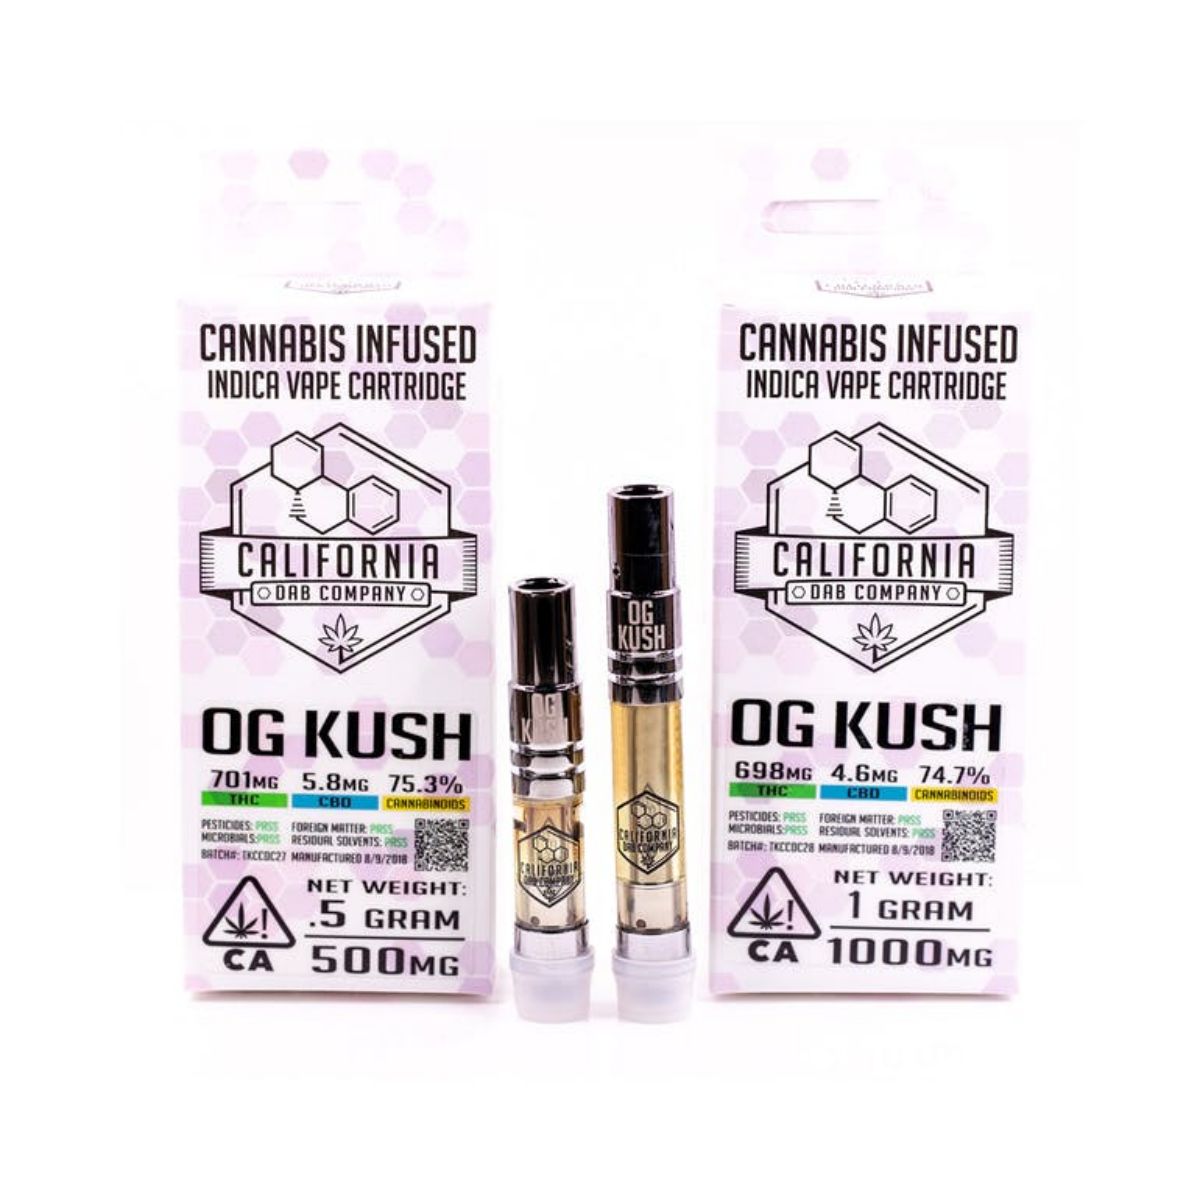 With A Wide Range of Options, We Can Serve Your Needs for Vape Cartridge Boxes